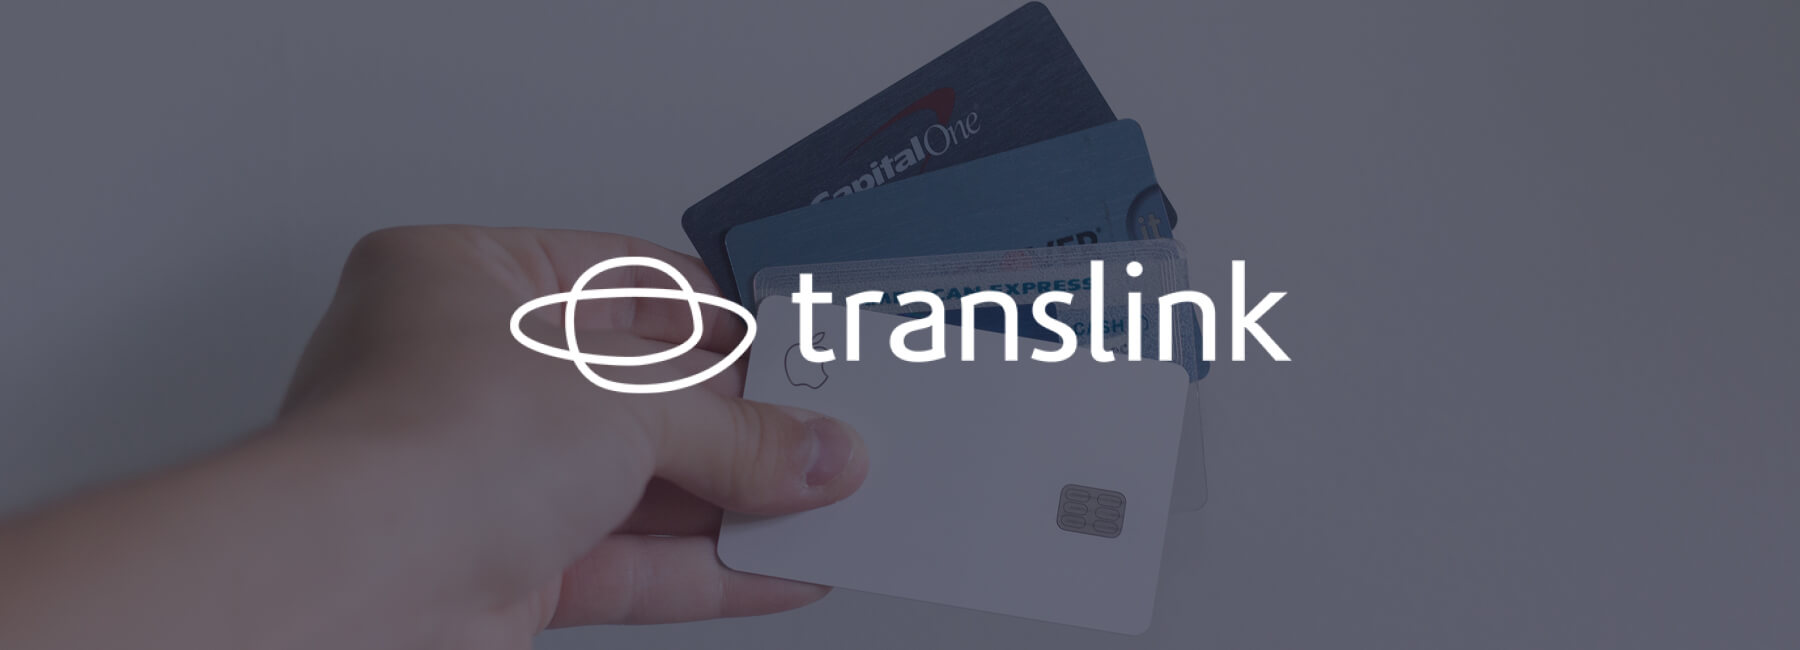 Translink provides seamless experience with online feedback